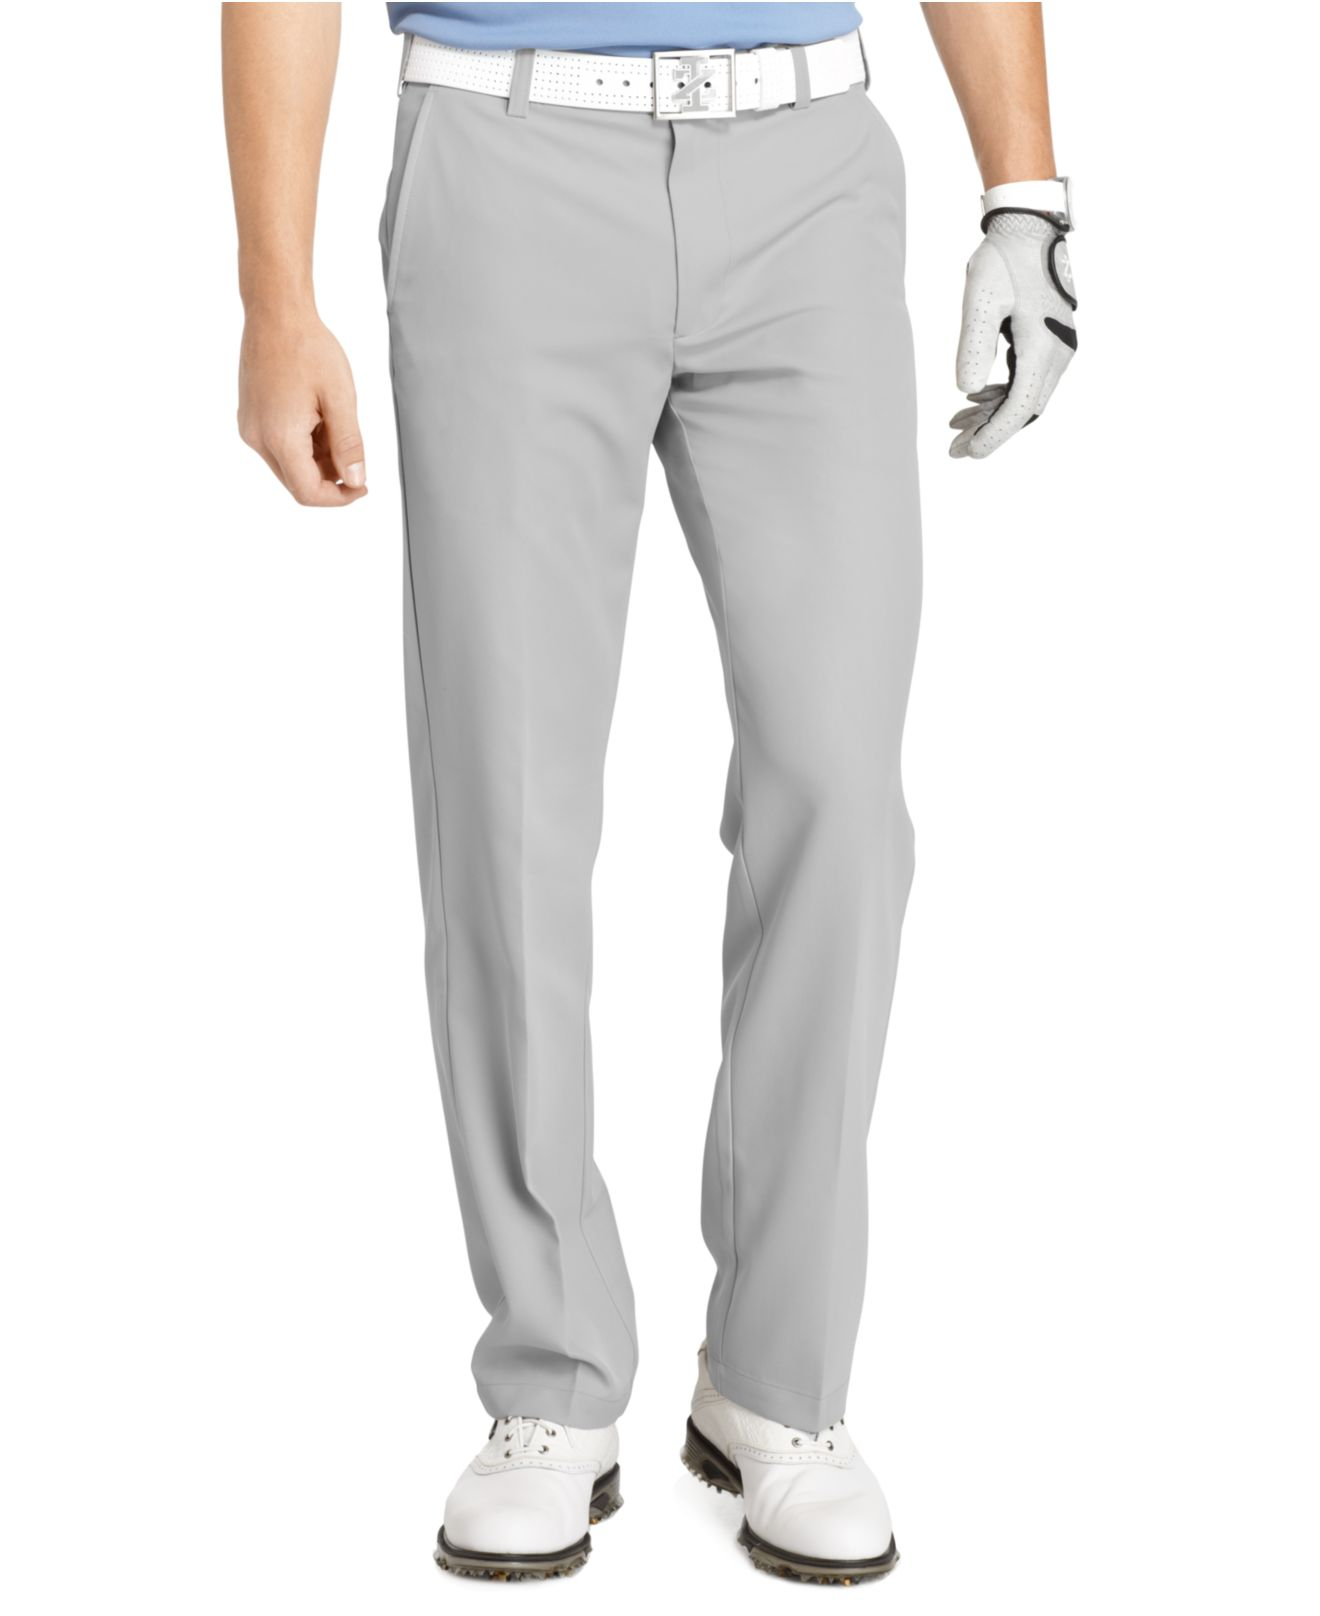 Izod Silver Golf Pants Slim Fit Flat Front Pants Product 1 14767958 0 302355656 Normal 